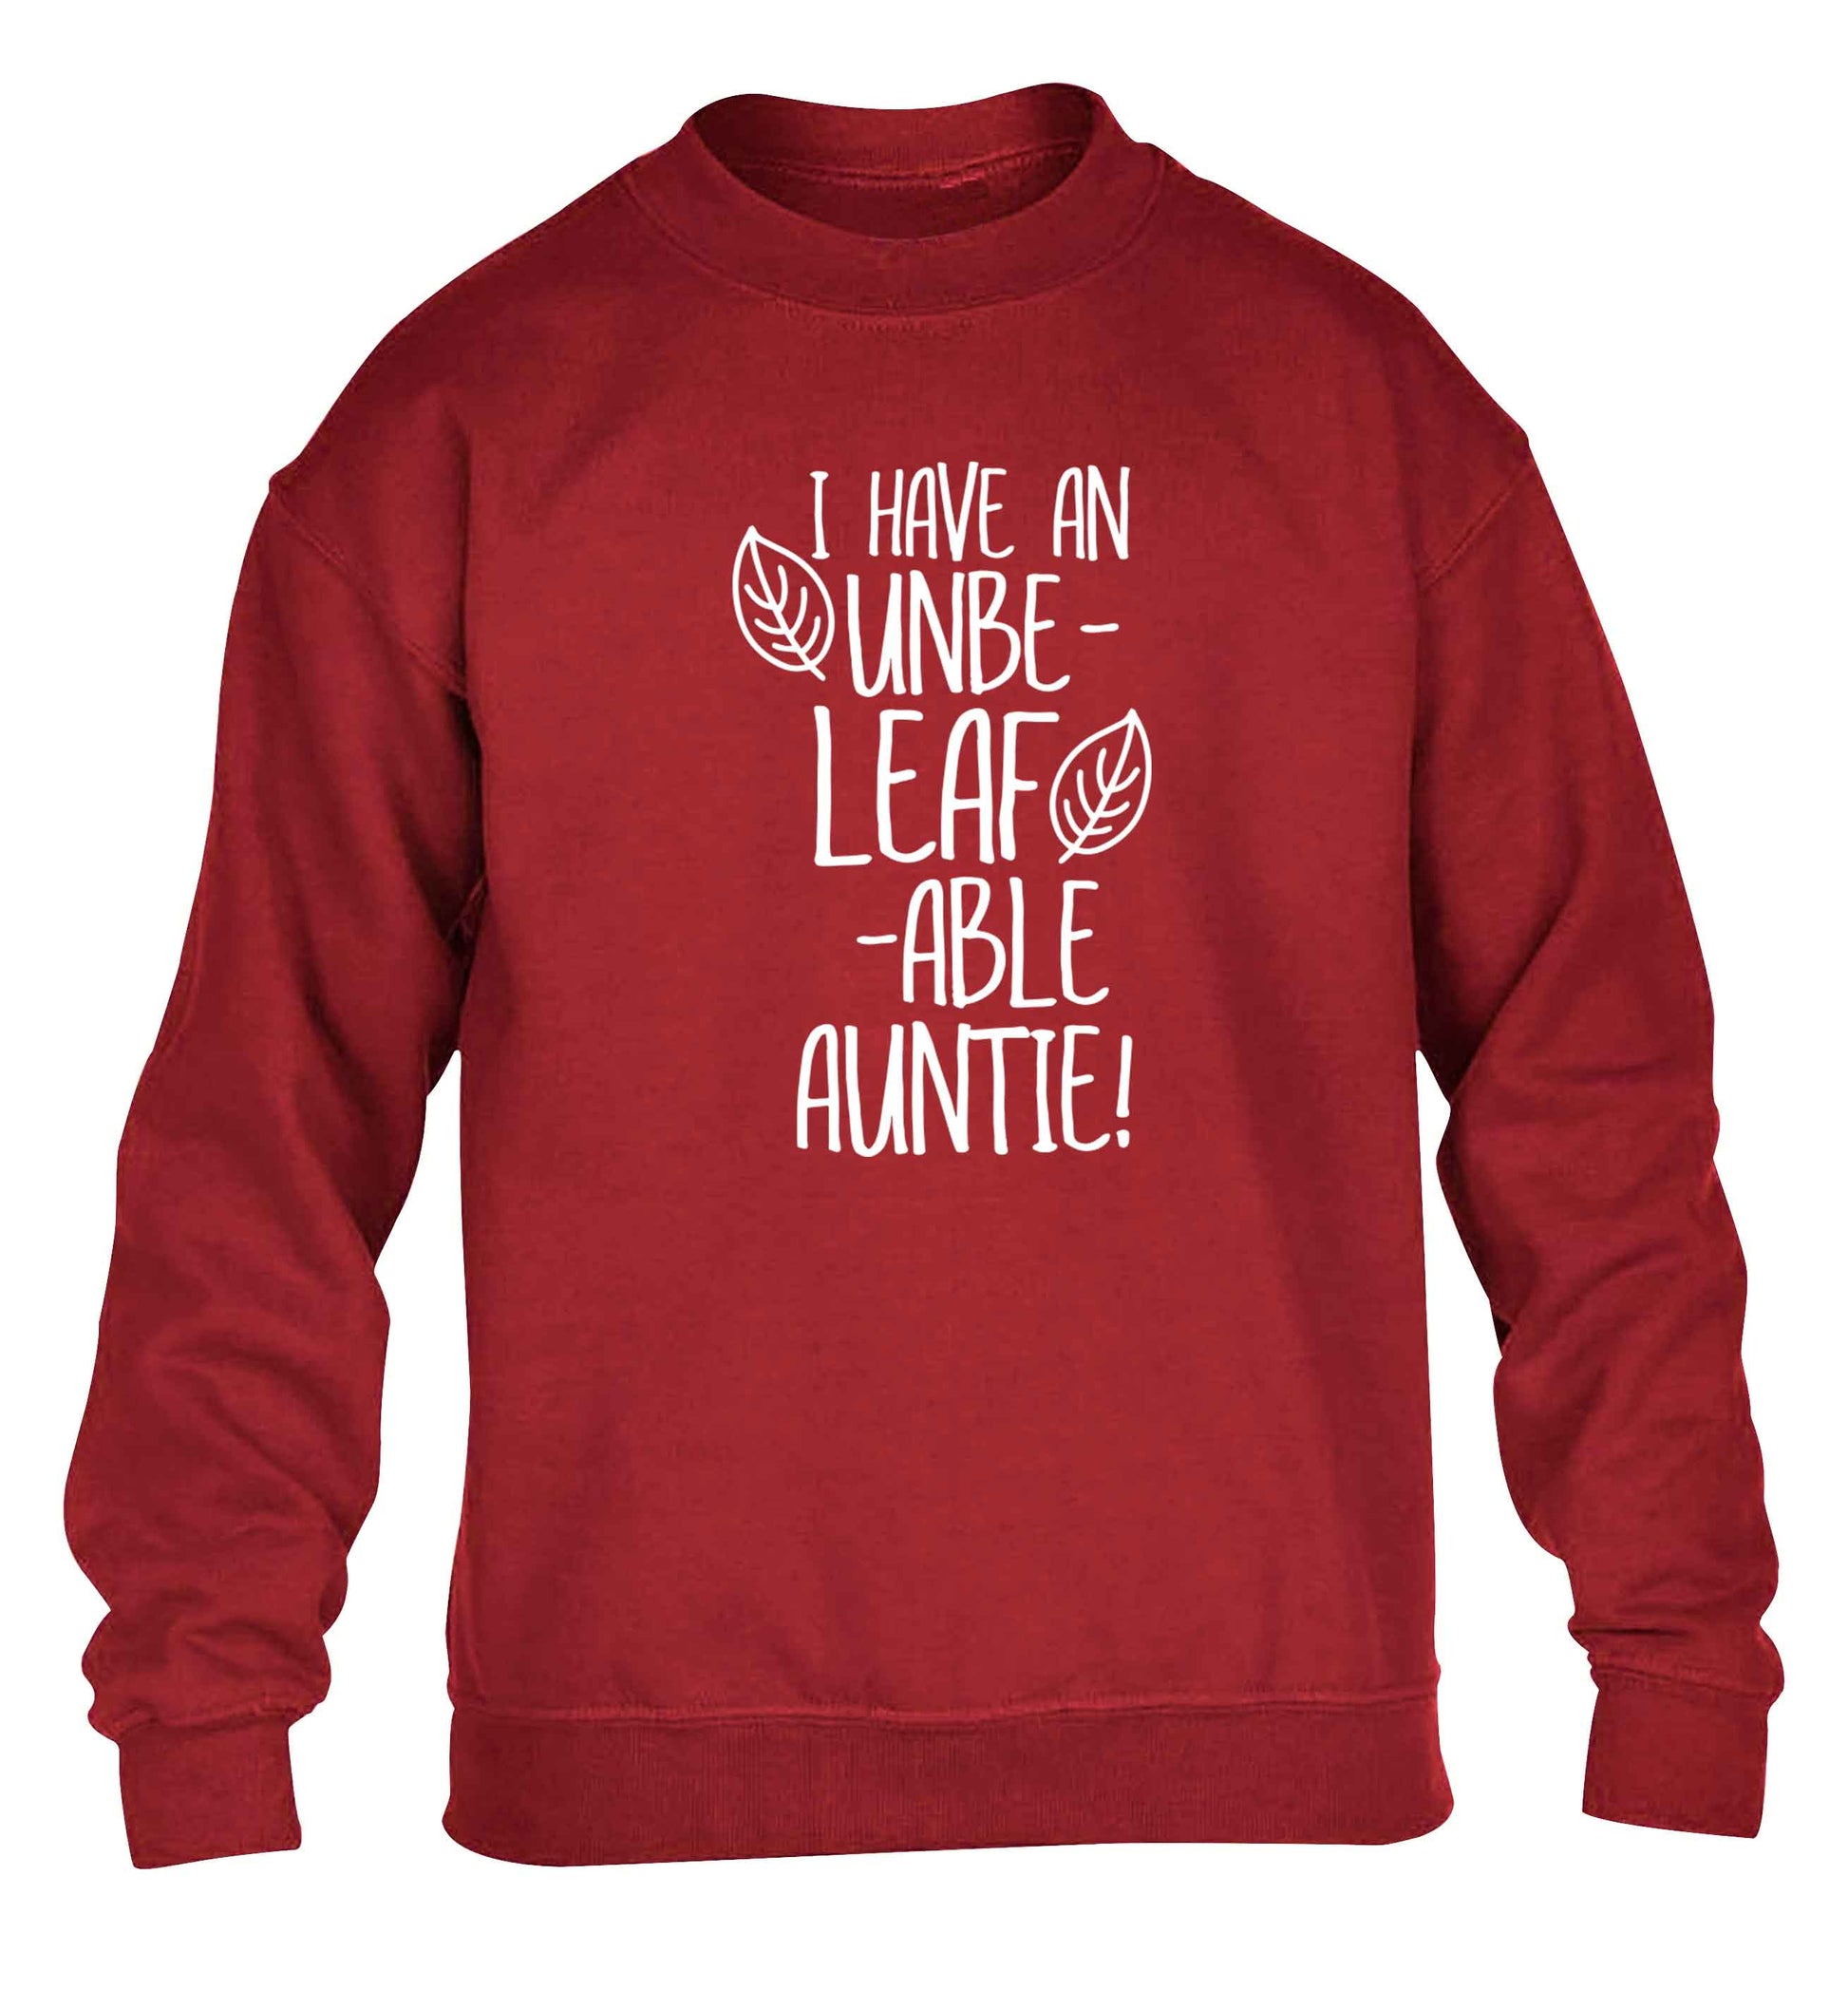 I have an unbe-leaf-able auntie children's grey sweater 12-13 Years